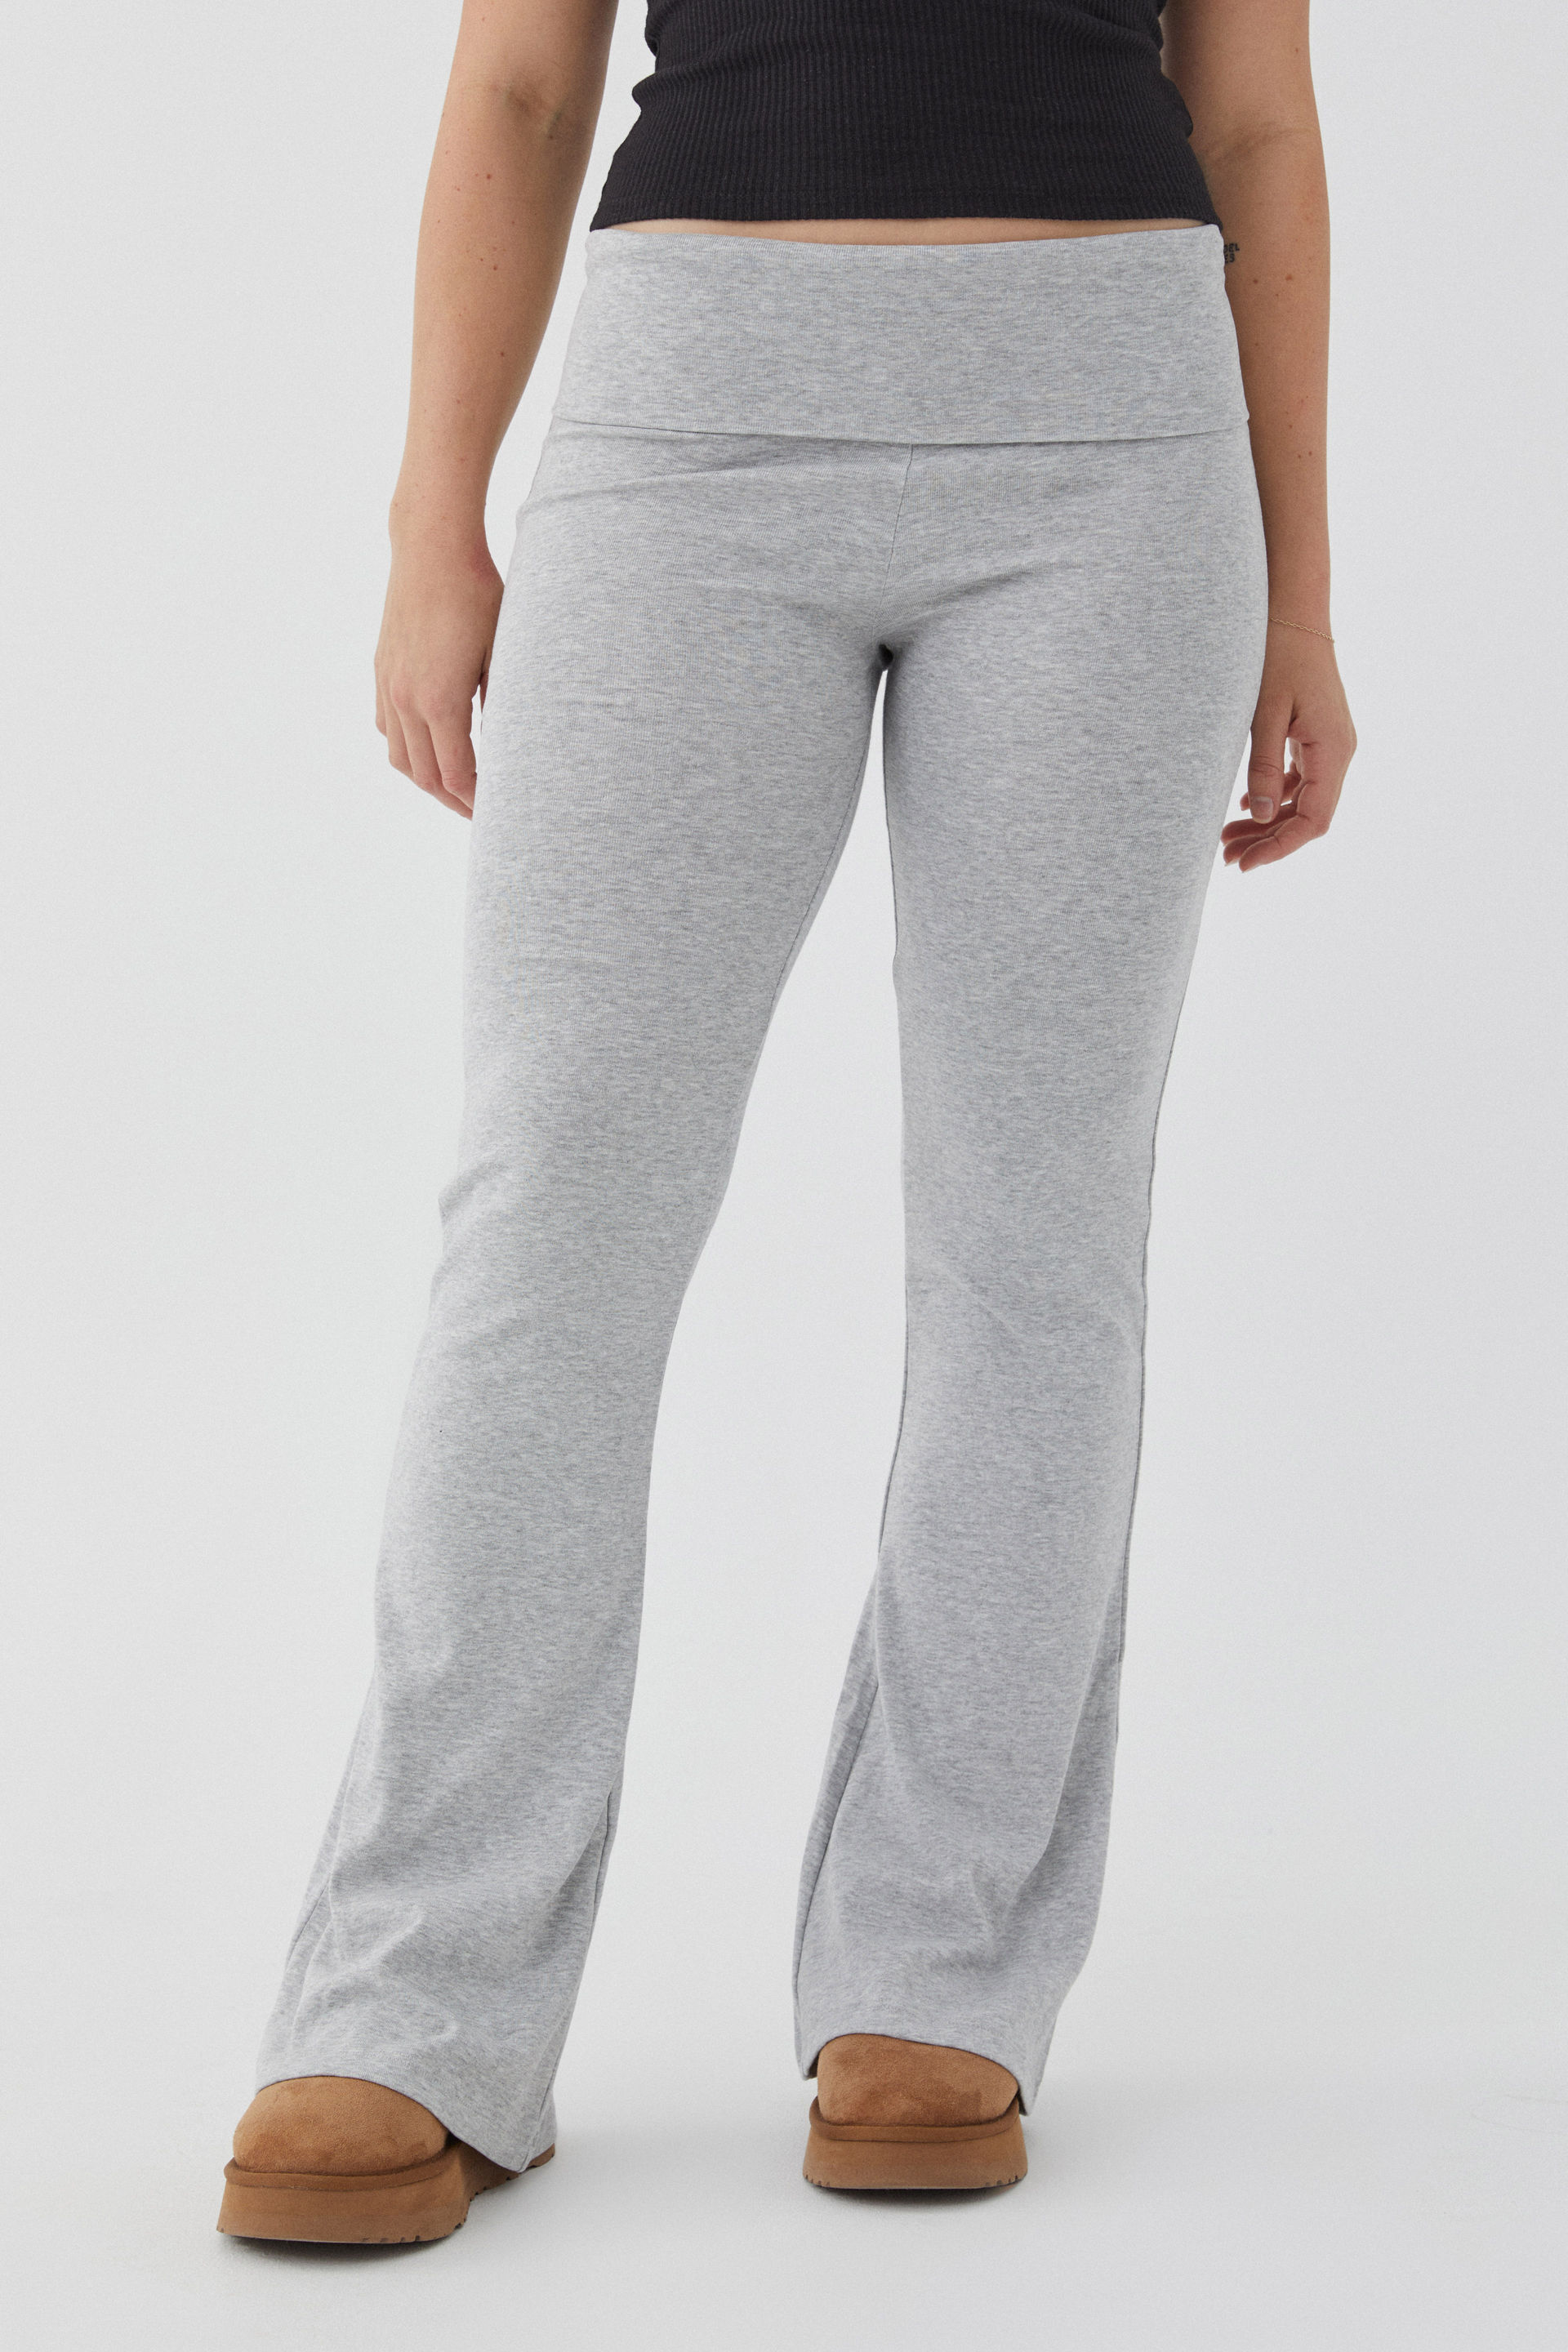 Buy Kissero Light Grey Track Pants for Women and Girls for  Sports/Gym/Running/Walking/Yoga Fitness Women's Sports/Cotton Fit Fabric  Stretchable Track Pant/Lower/Jogger for Women/Women Trackpants with  Pocket/Sizes-M/L/XL/XXL Online at Best Prices in India -